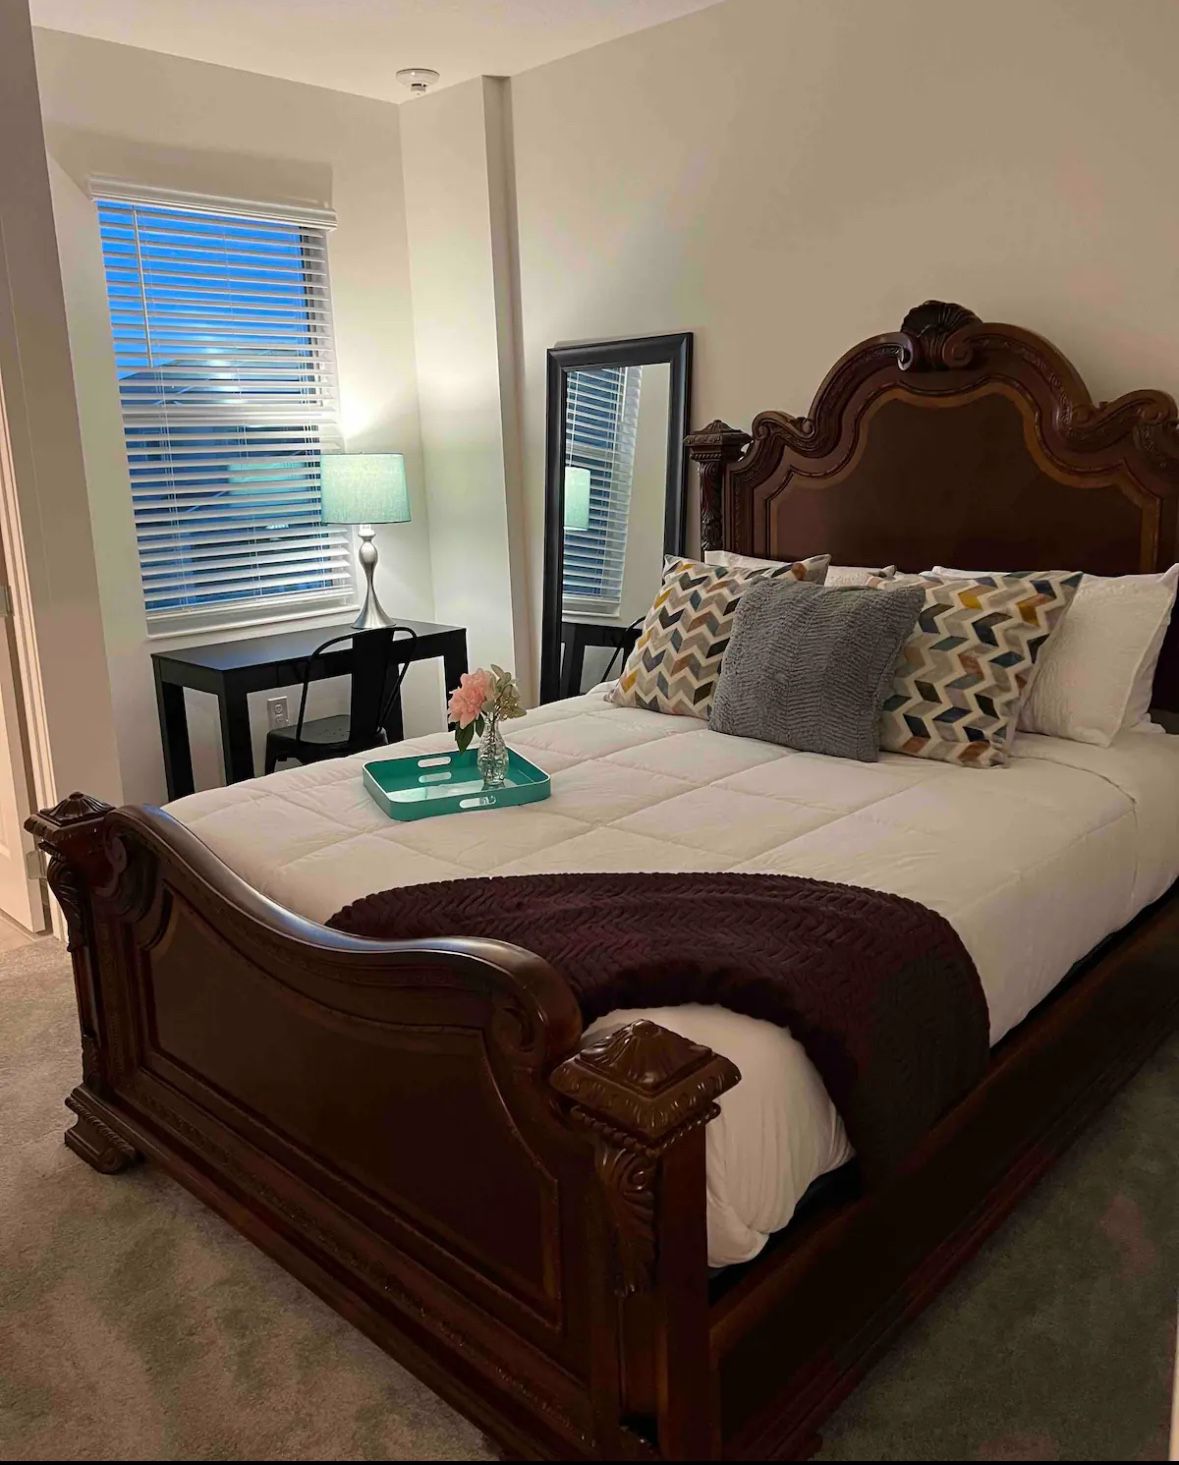 2 Queen Beds, Chair And Nightstand 